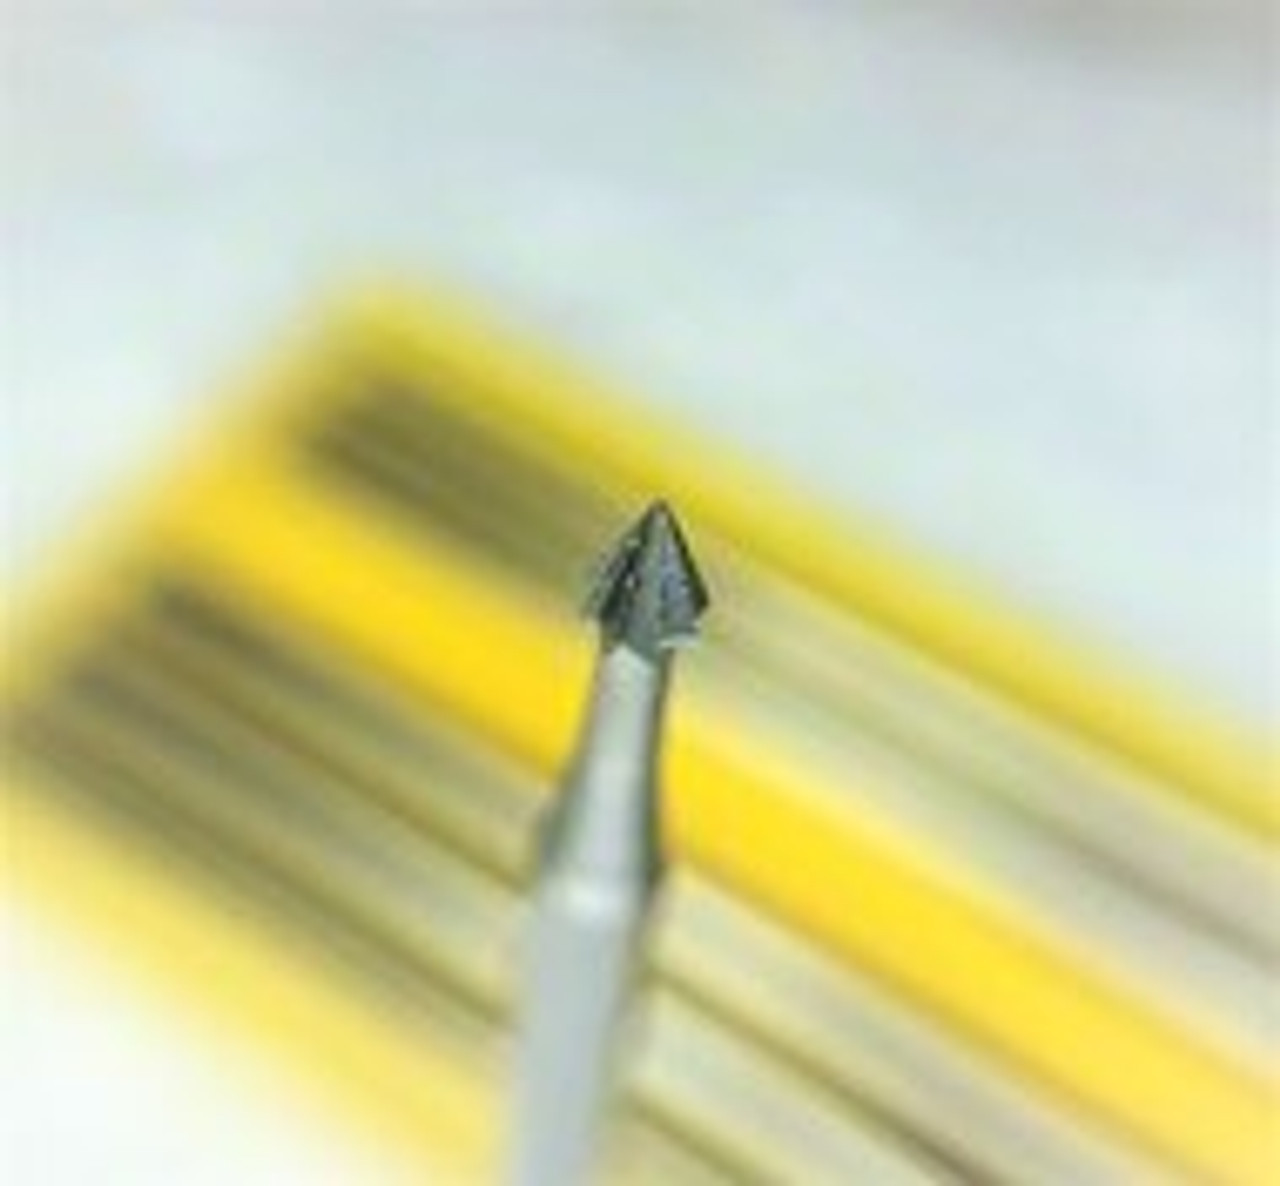 Jewelers Fox Pointed Steel Bur size 2.9 mm Made in Germany Pack of 6